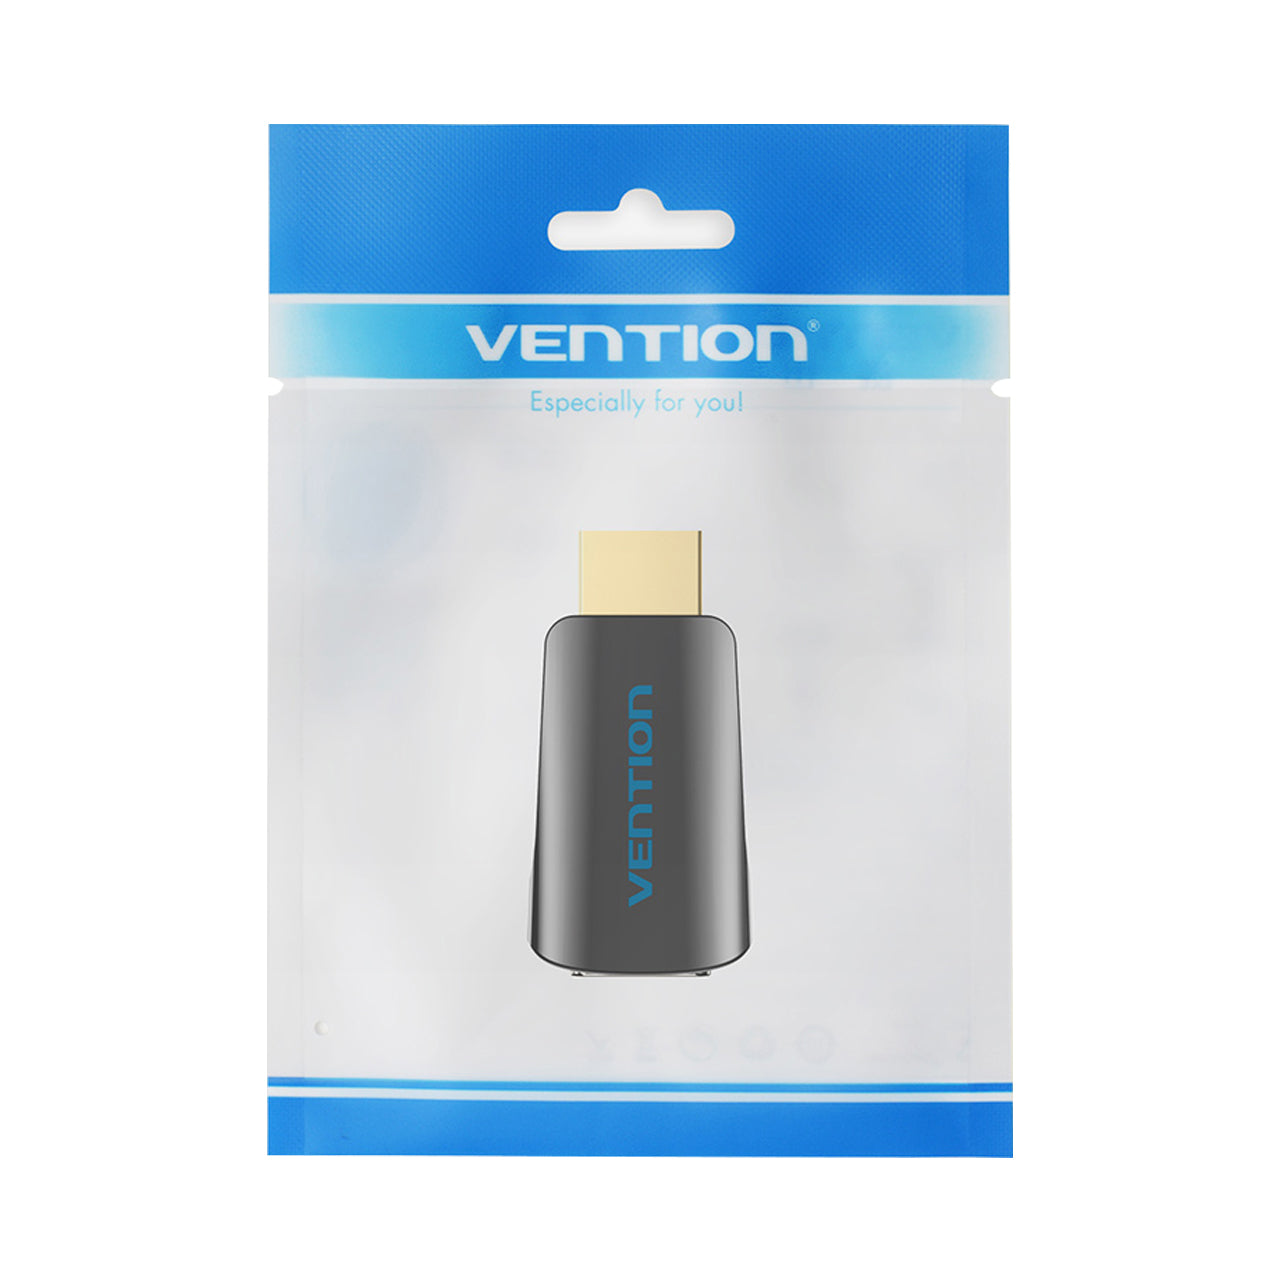 Vention HDMI Male to VGA Female Adapter Converter 1080p 60hz Gold-Plated with 3.5mm Audio Port (AIDB0)